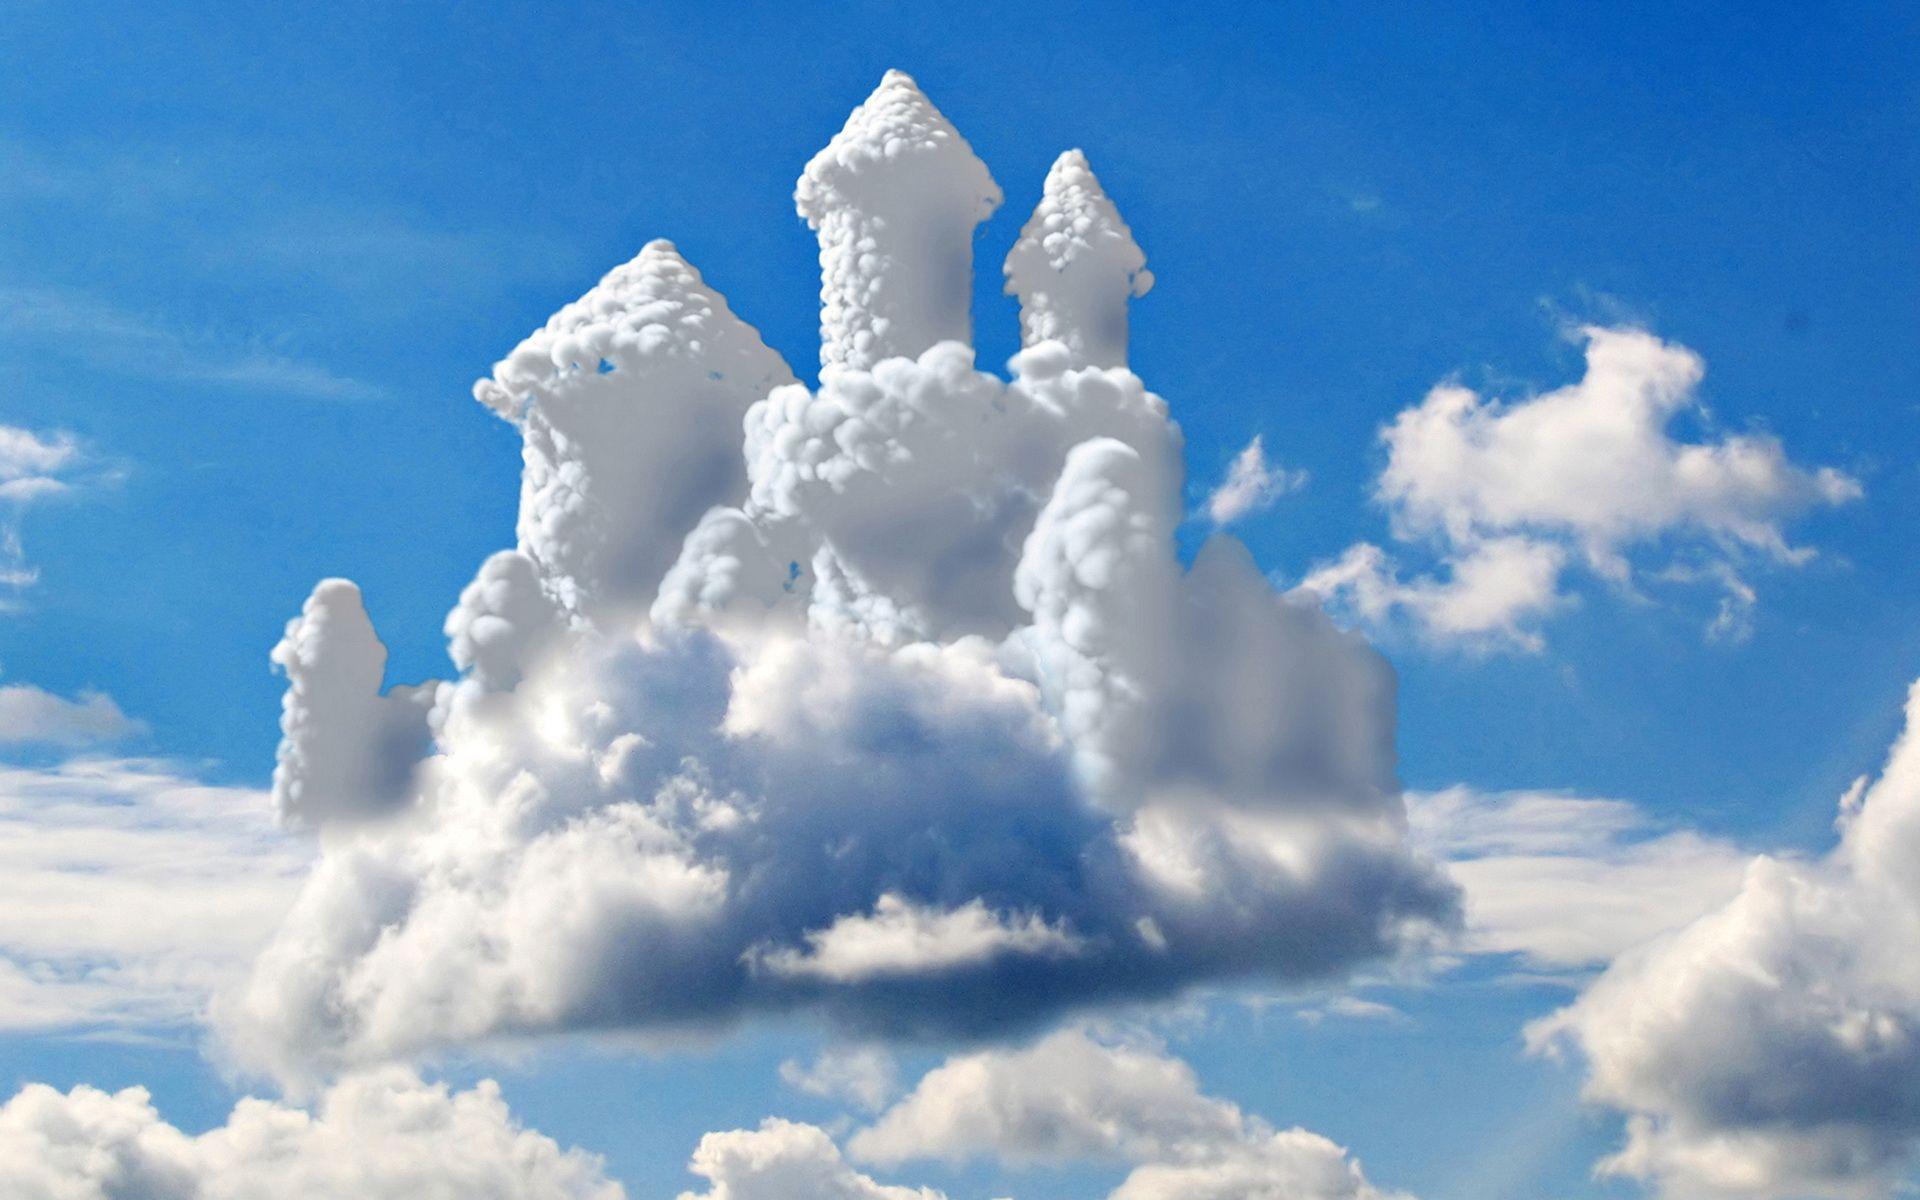 Celestial Castle wallpaper and image, picture, photo